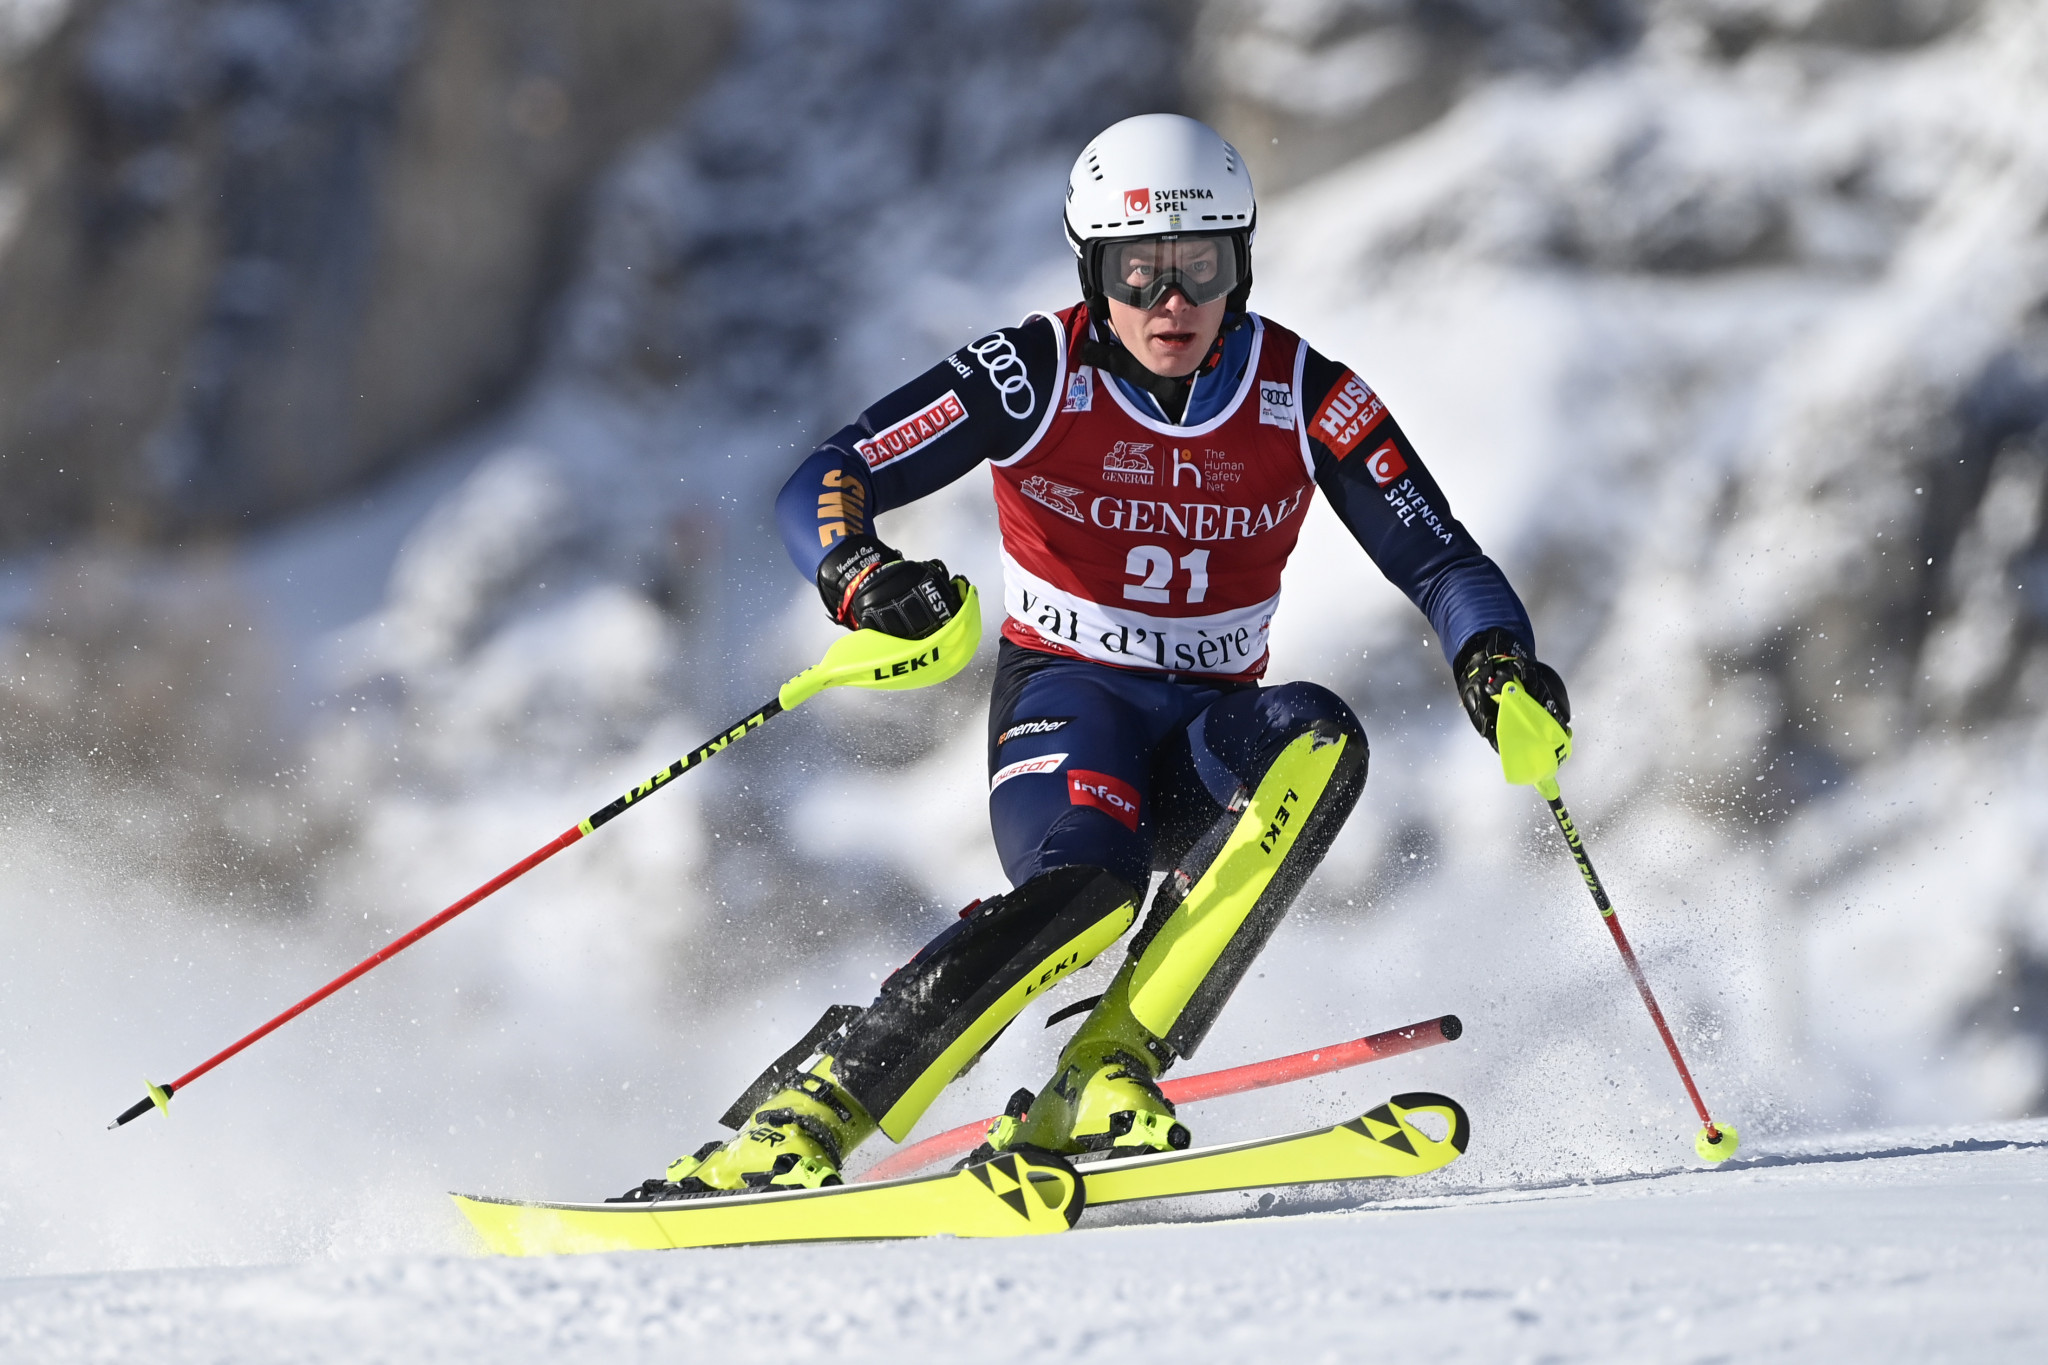 Kristoffer Jakobsen of Sweden placed second in Val d'Isère ©Getty Images